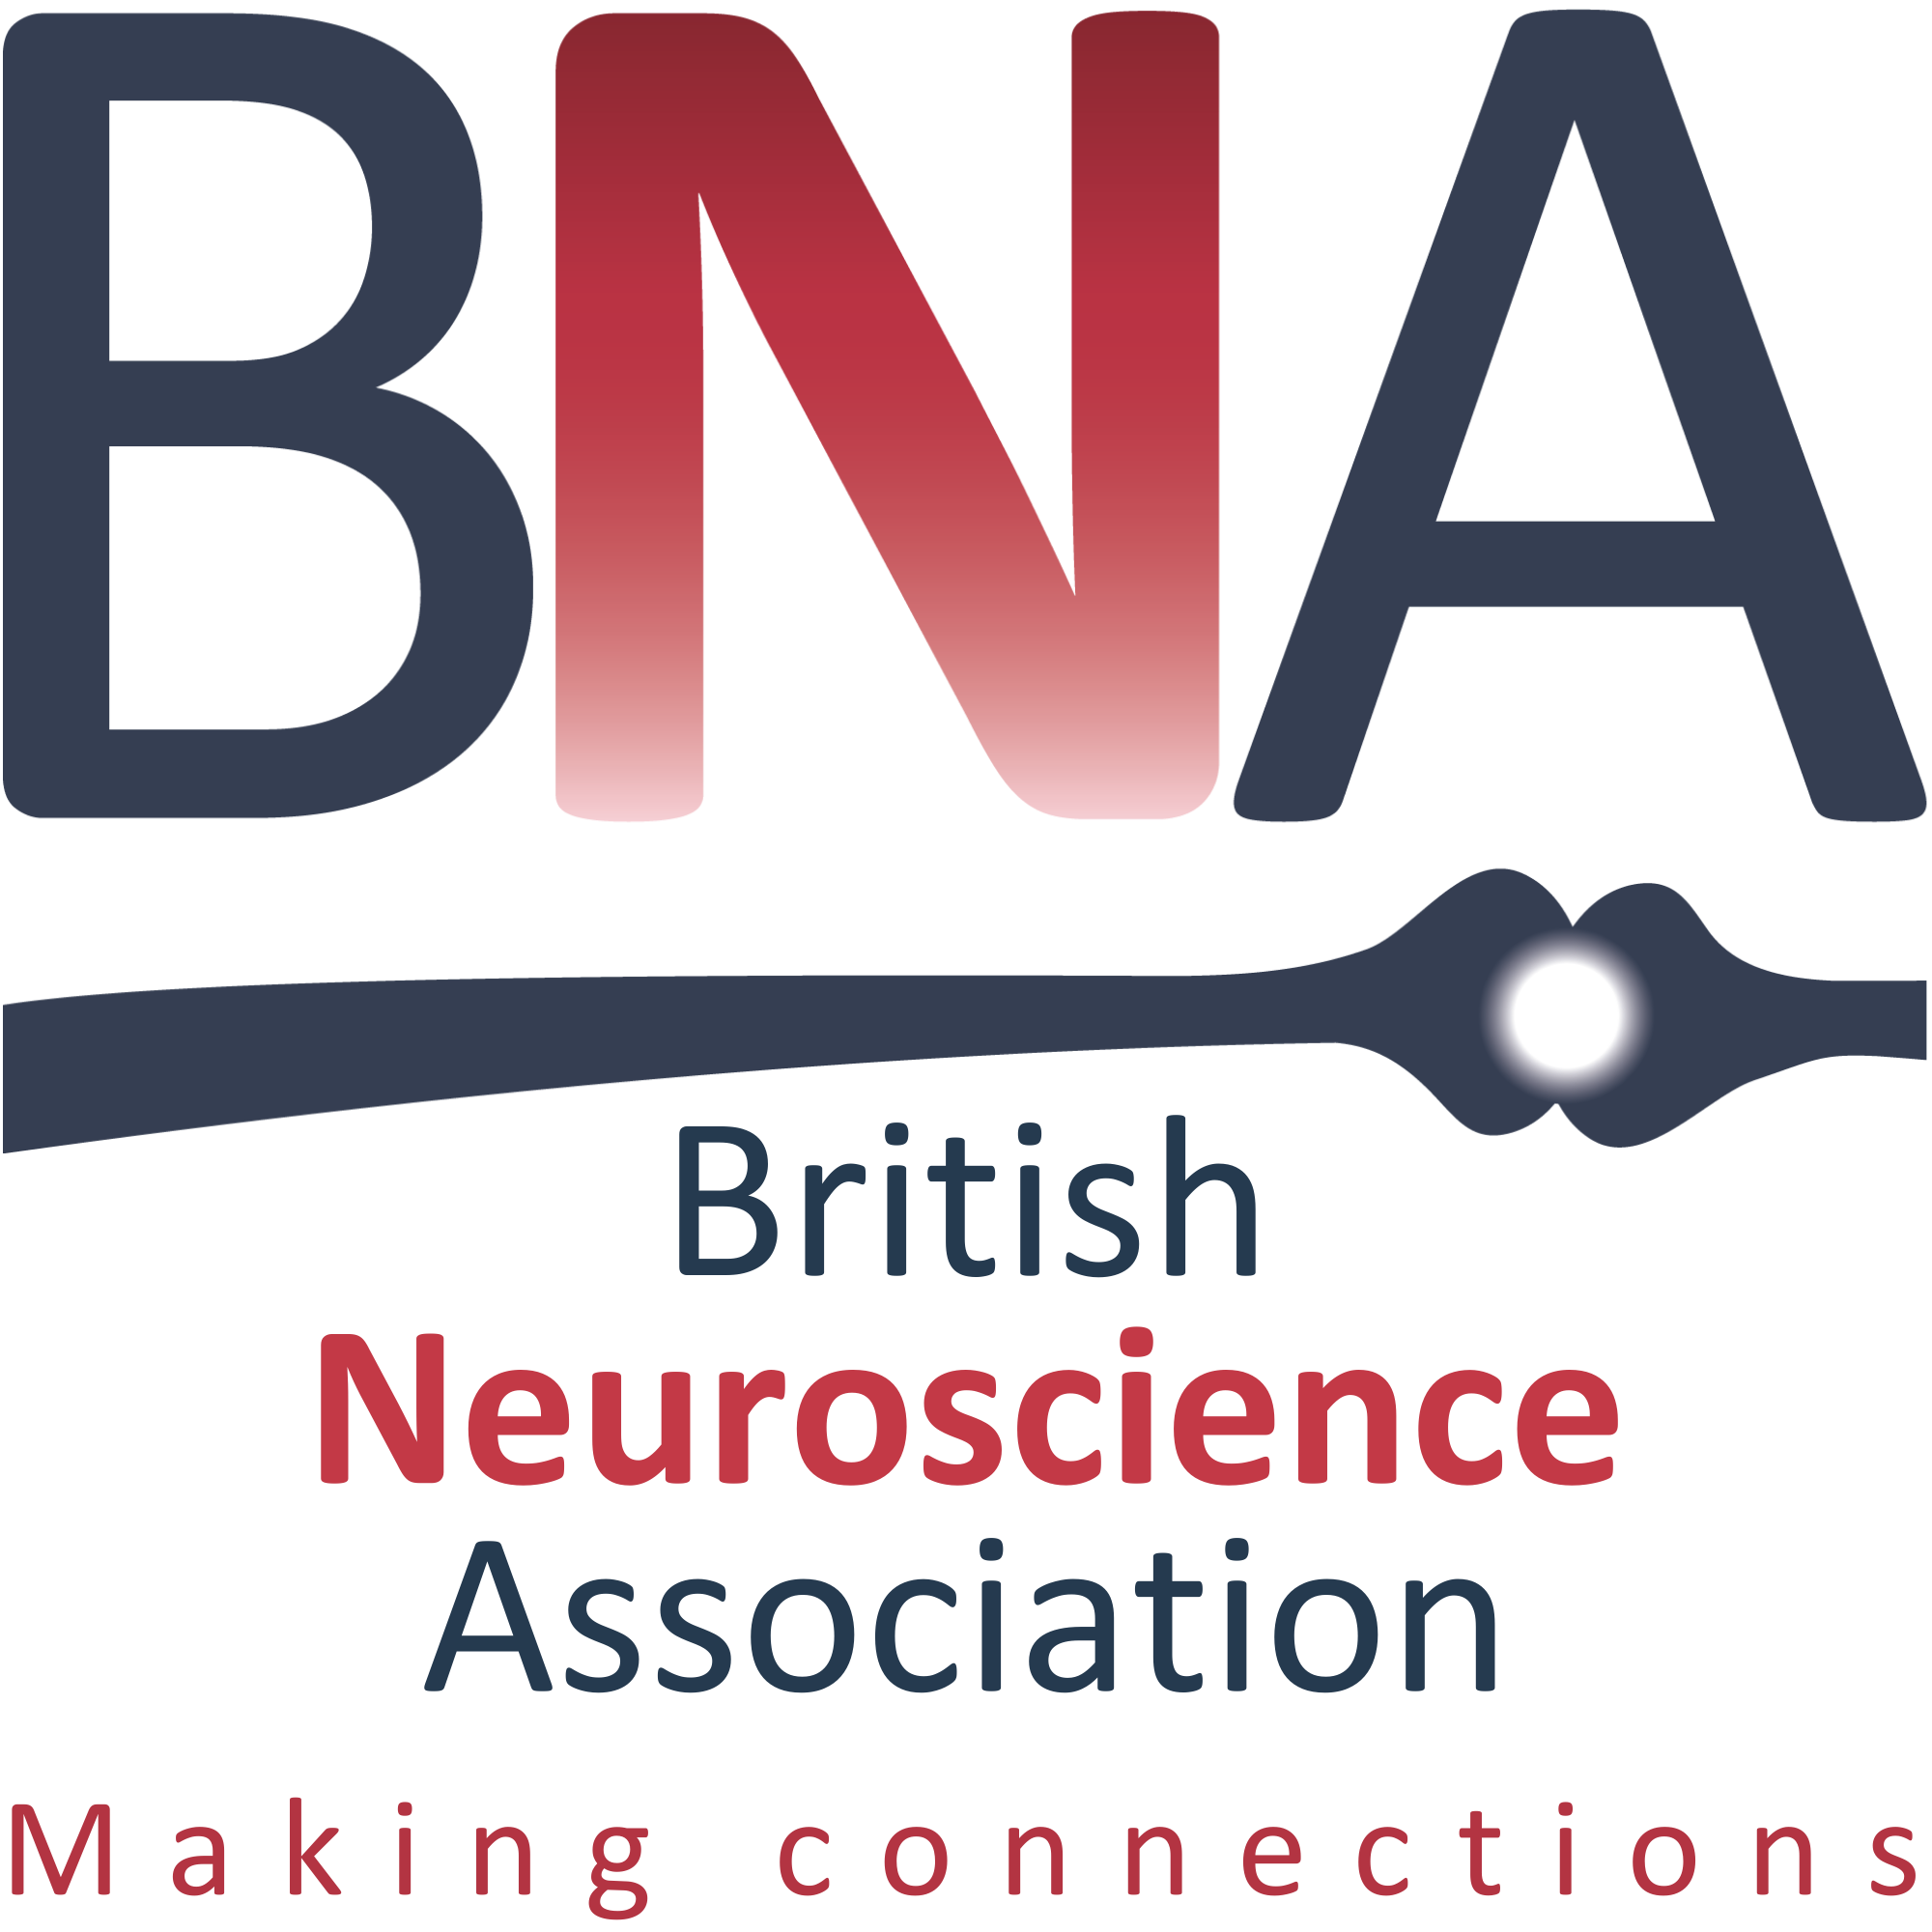 The British Neuroscience Association: Making Connections